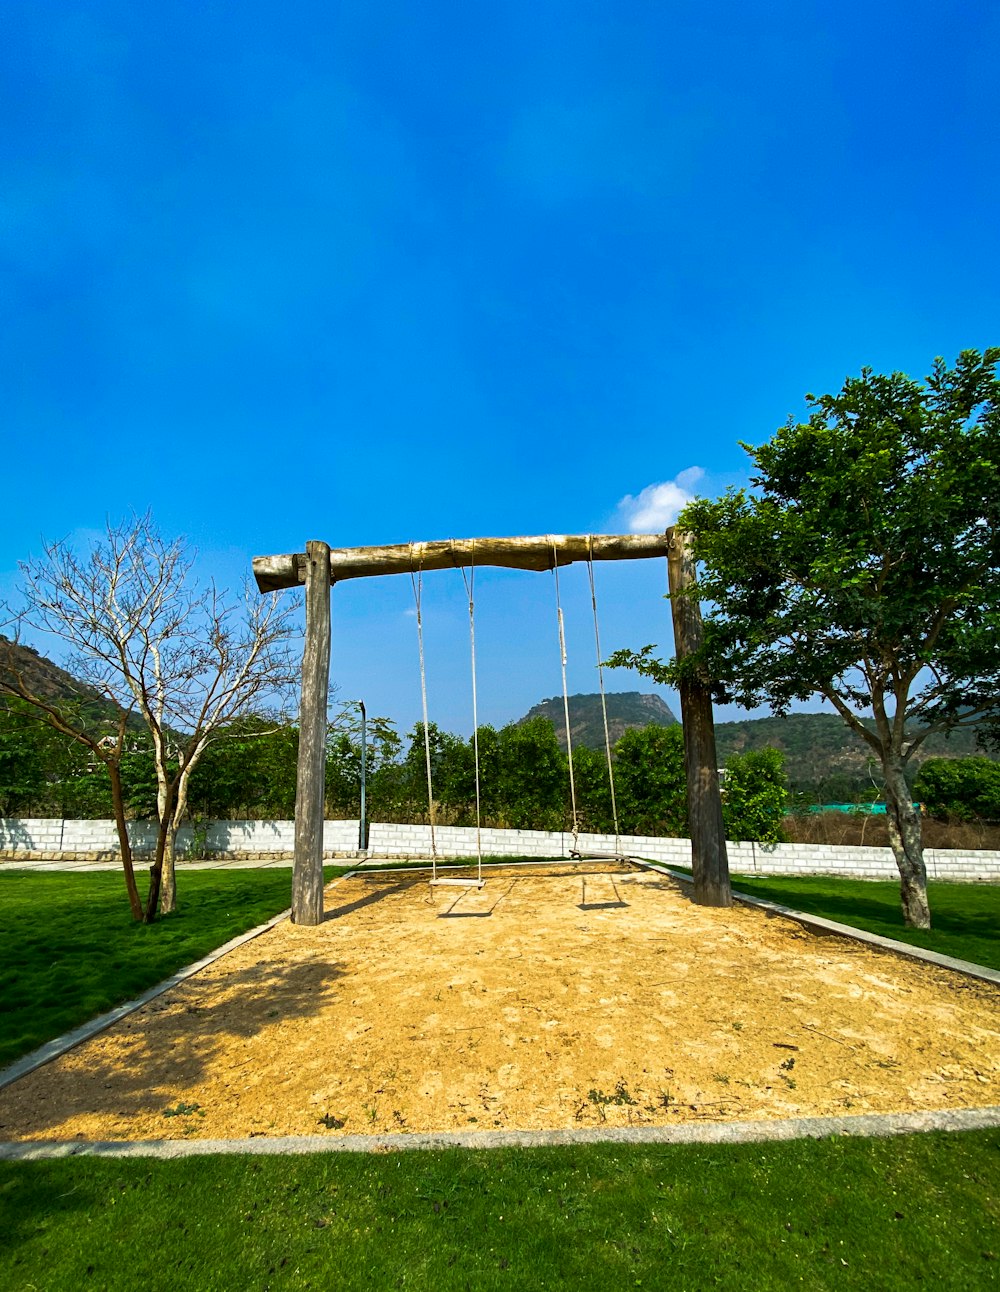 a swing set in the middle of a grassy field